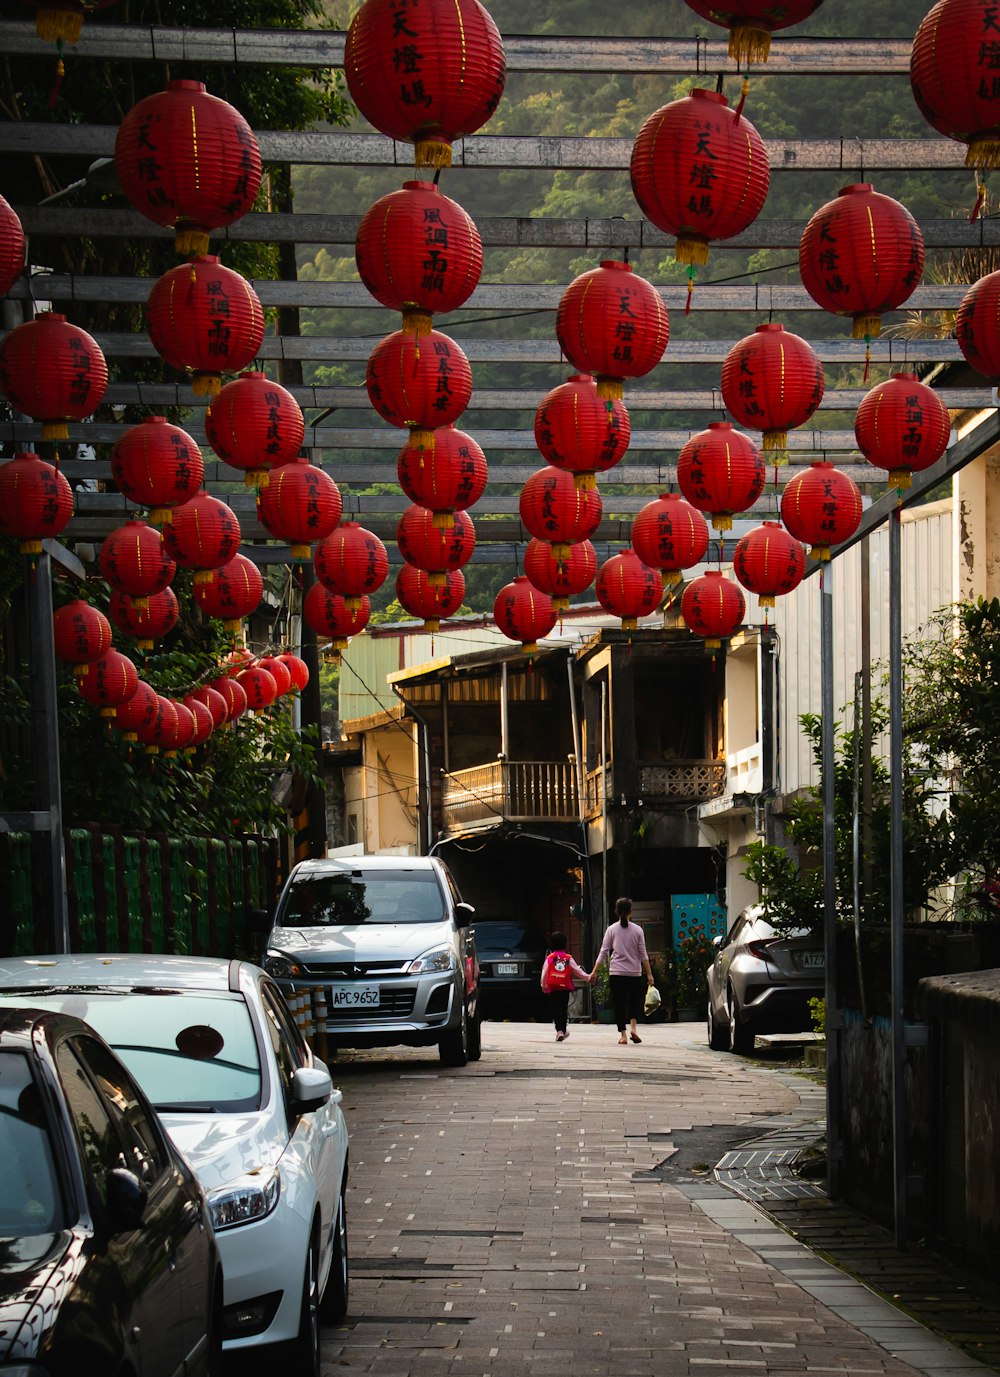 red round balloons on street during daytime